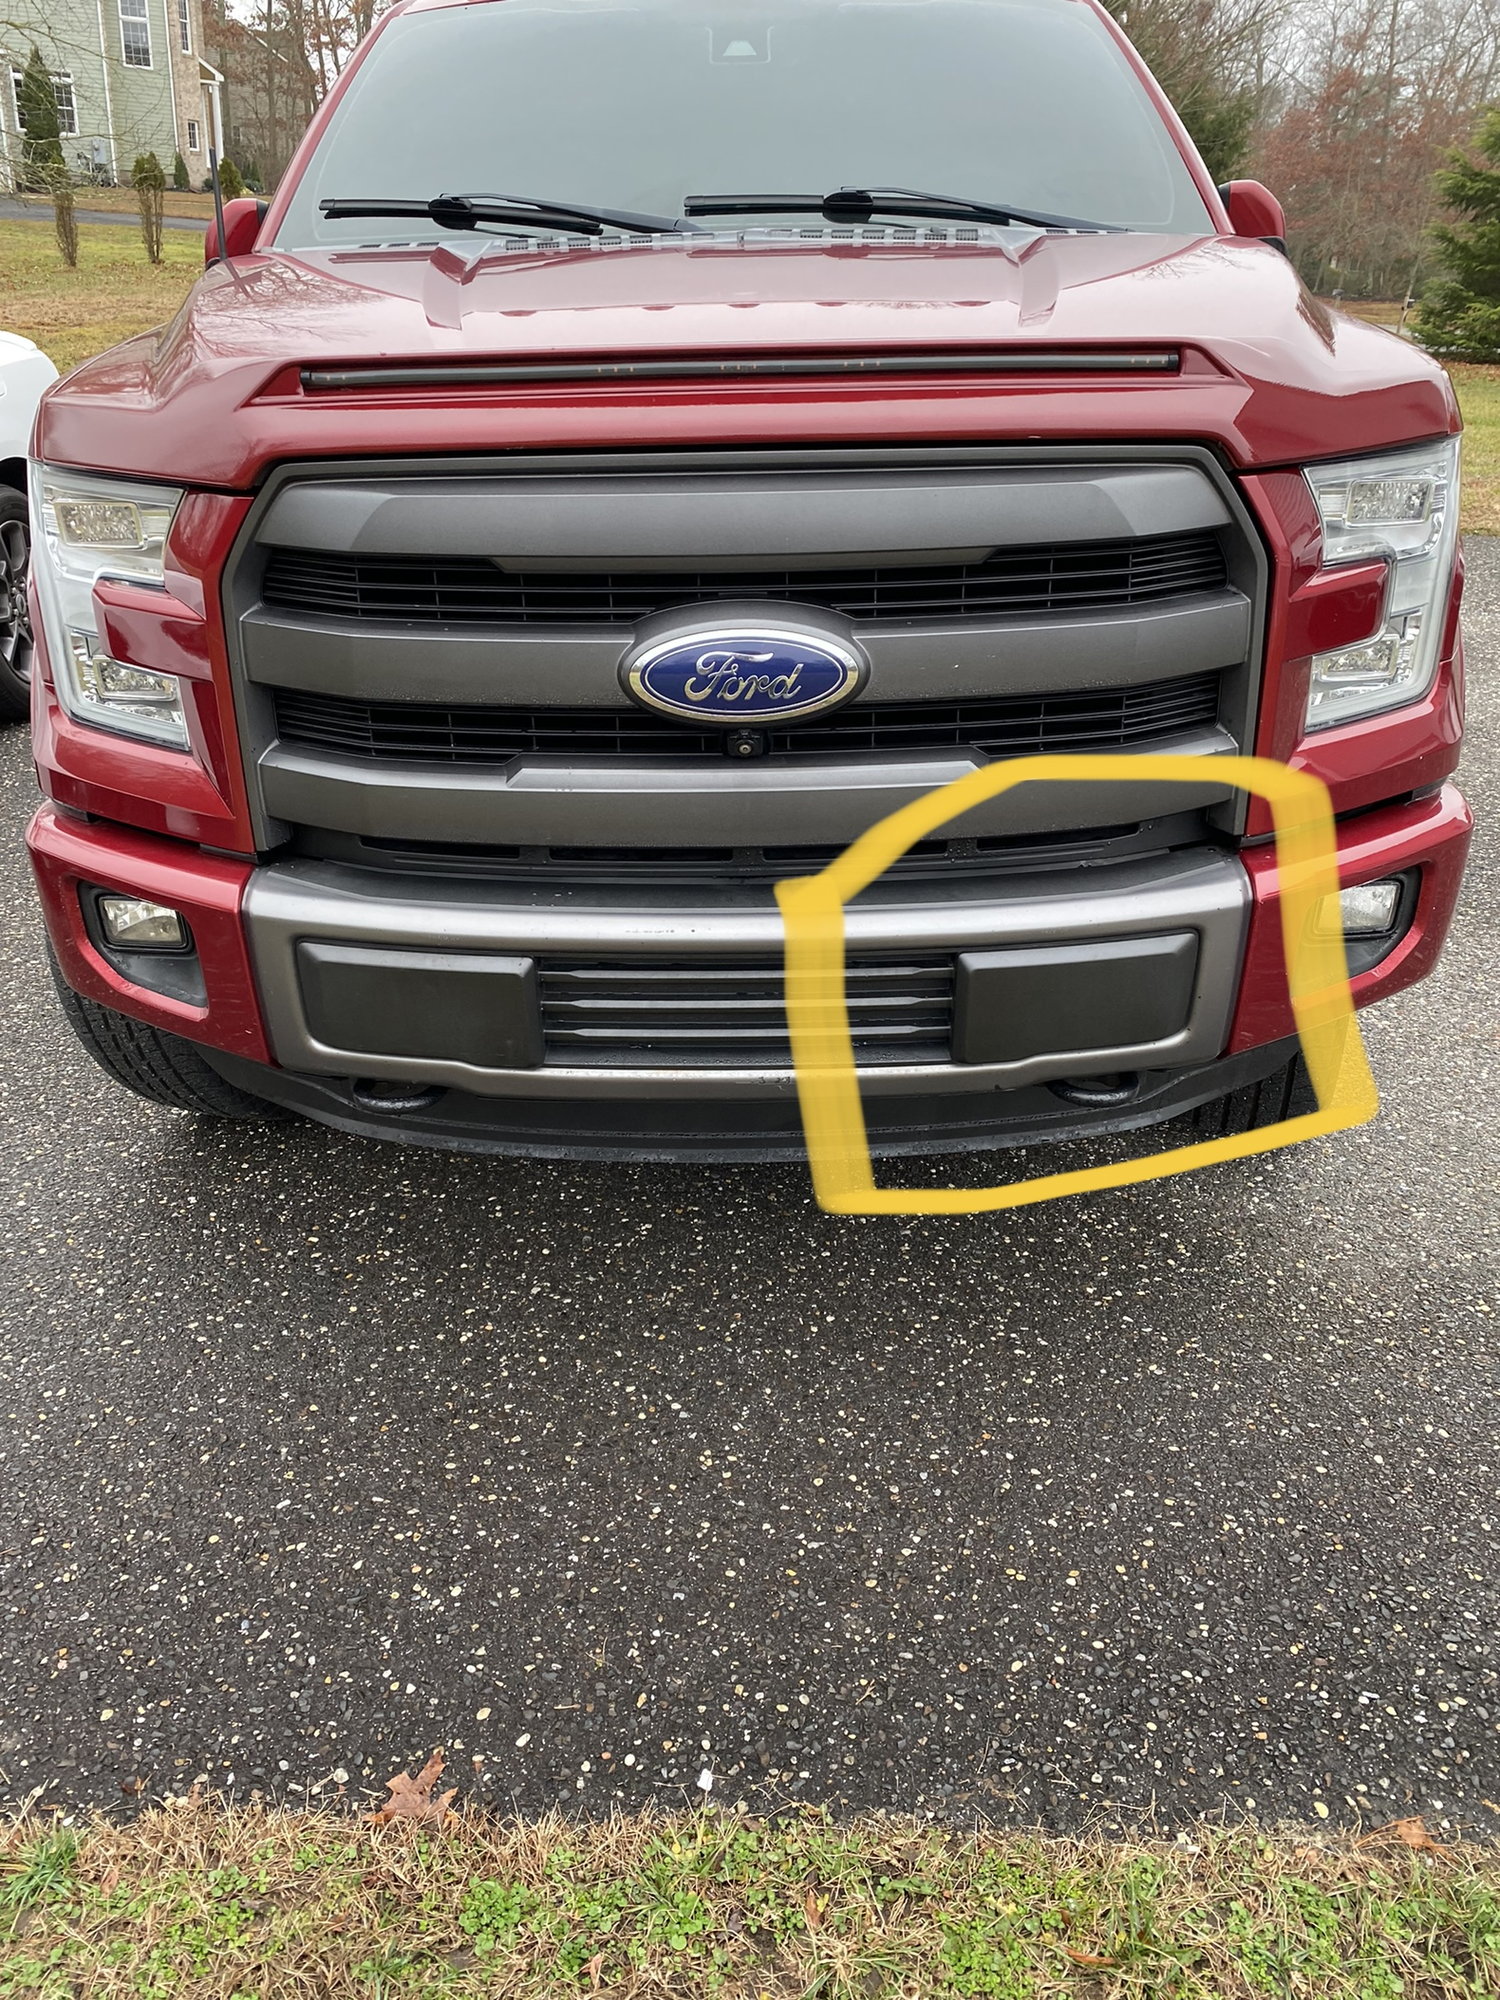 Collision Sensor Check Ford F150 Forum Community of Ford Truck Fans